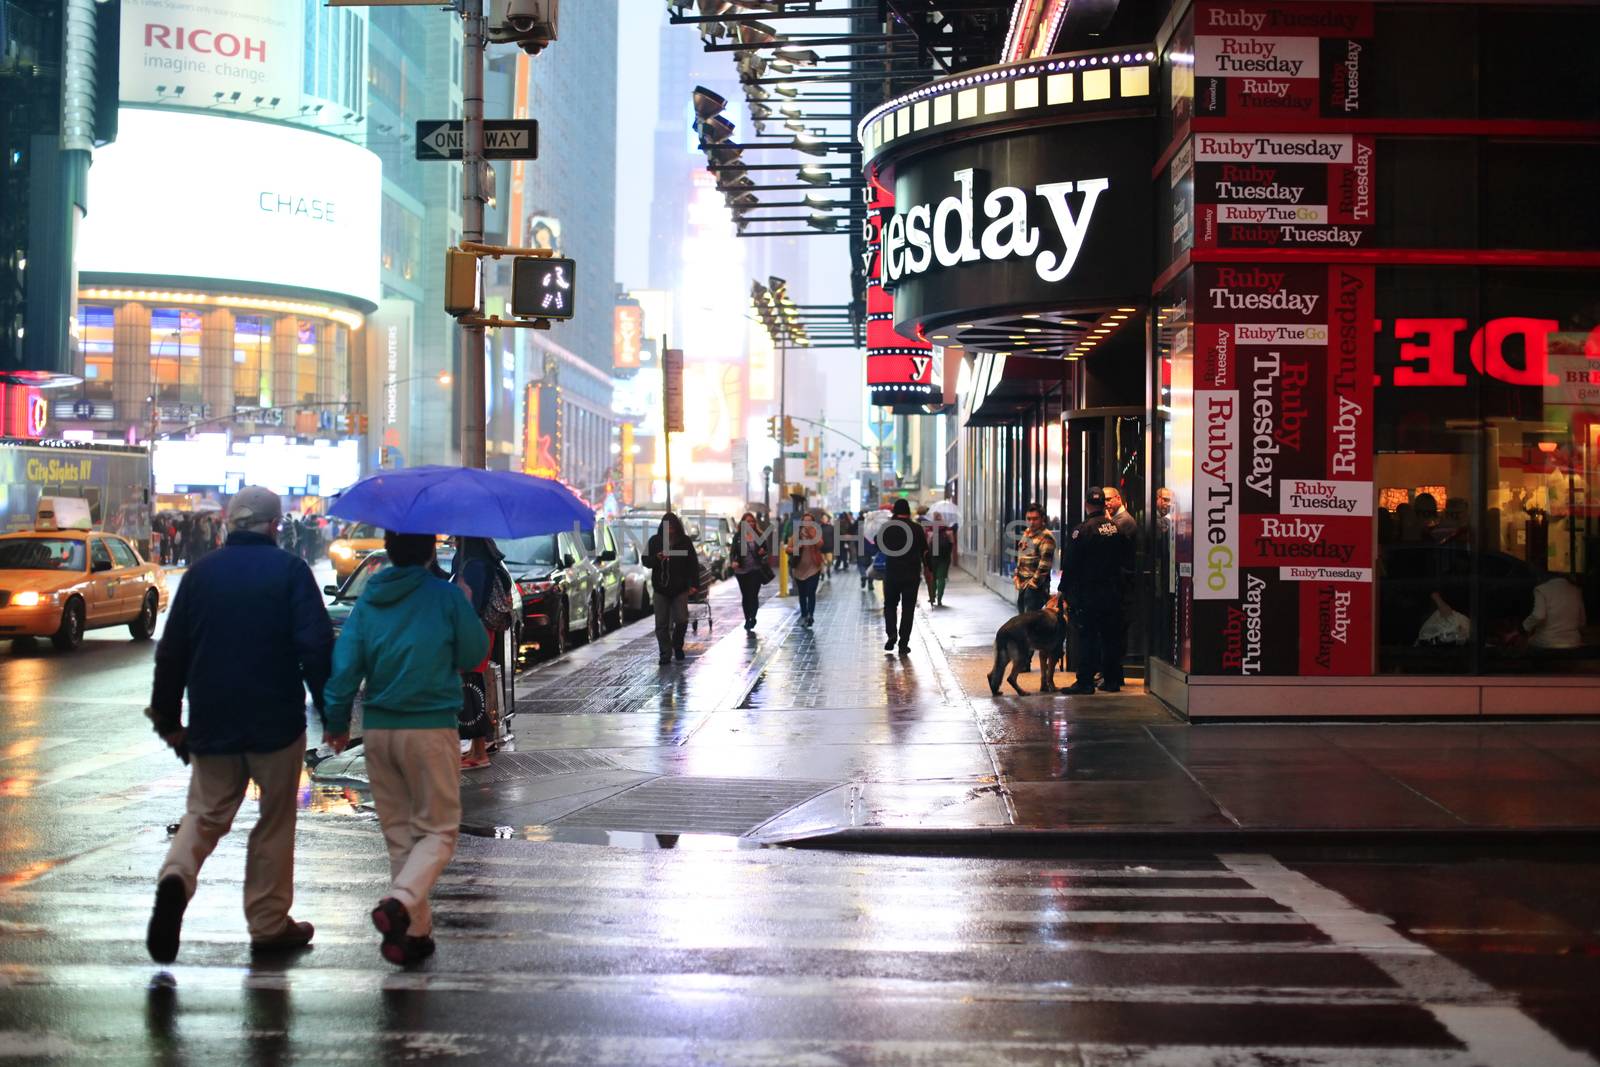 Time Square at night in the rain by friday